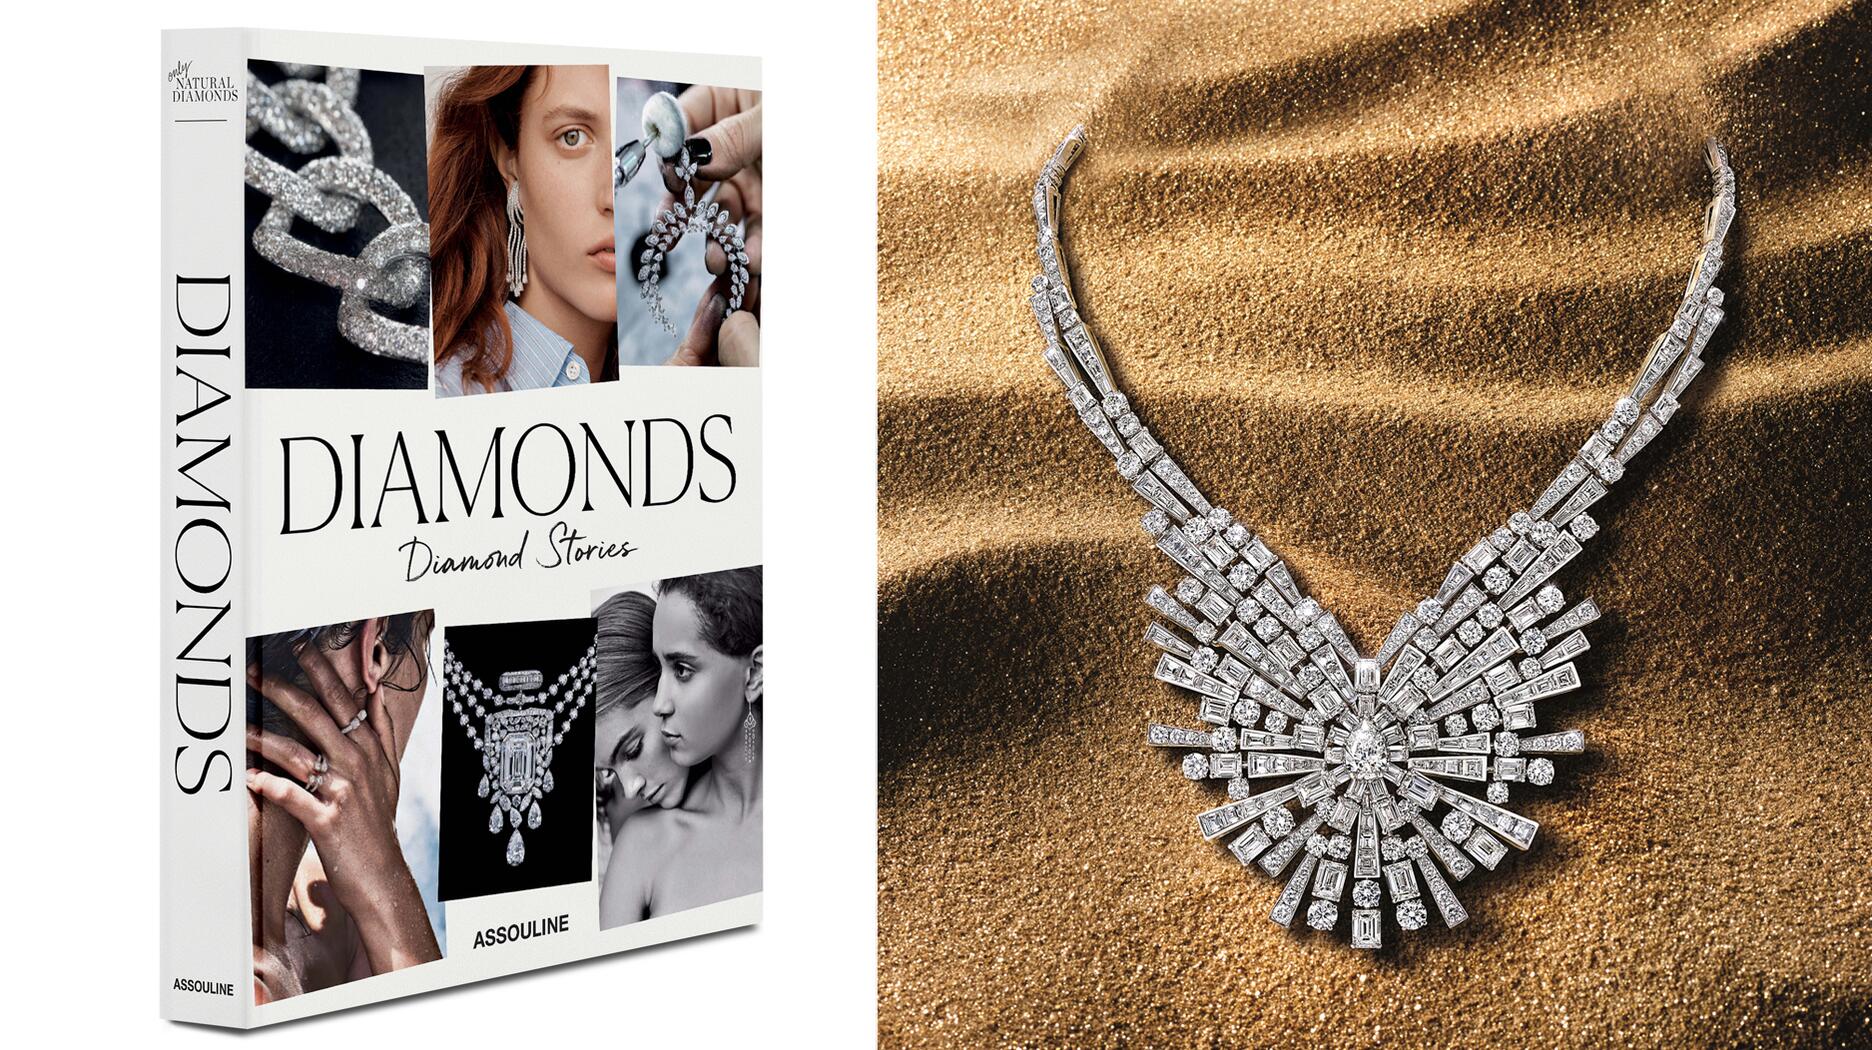 This Coffee-Table Book Is the Perfect Present for Diamond Lovers